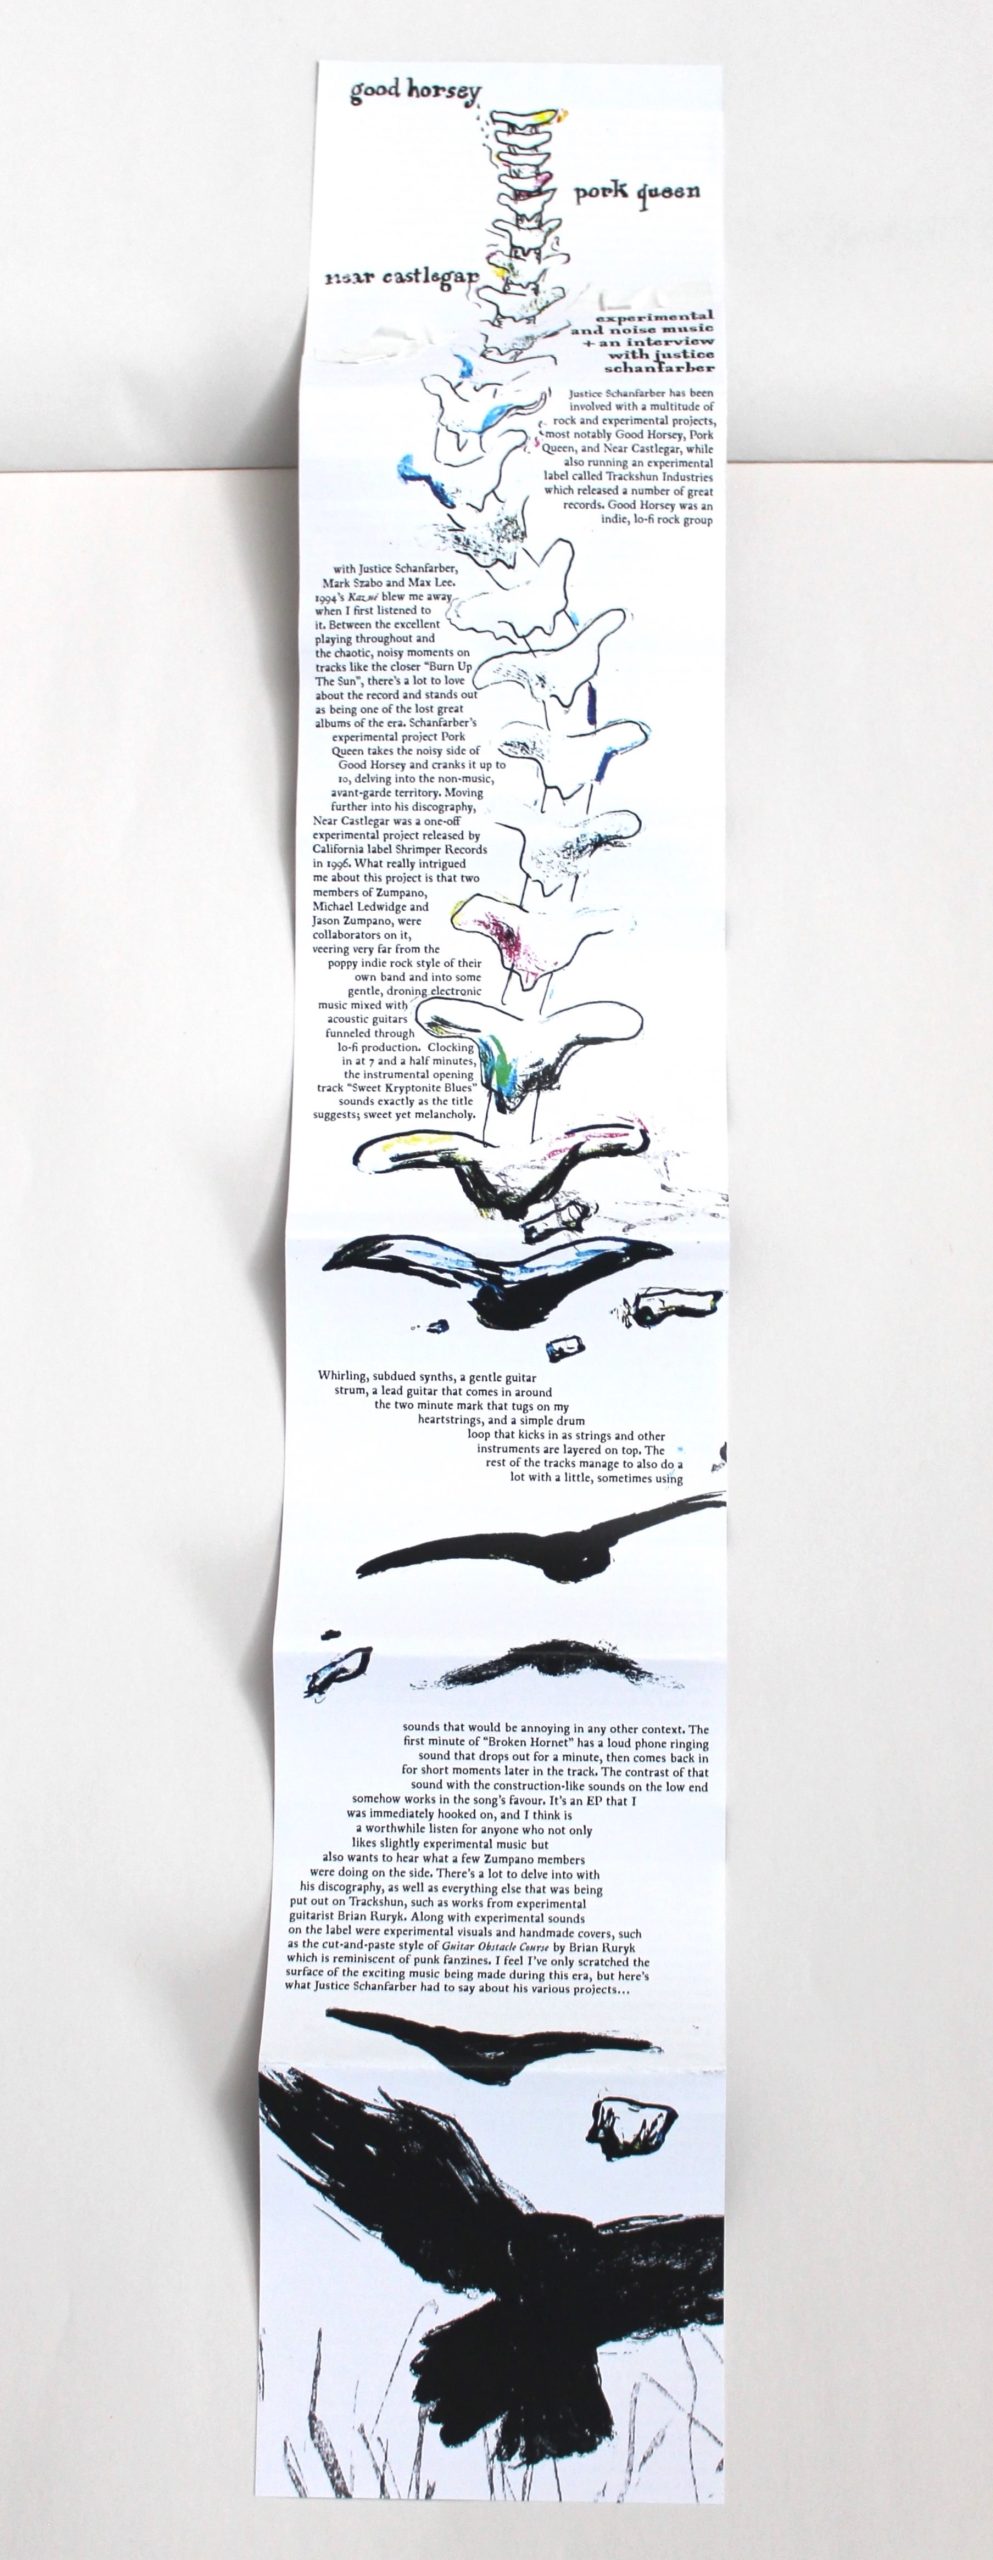 A 6-part CD fold-out with a drawing/painting of a spine that turns into crows doing down the fold-out. Around the art is the band names Good Horsey, Pork Queen, and Near Castlegar and "experimental and noise music + an interview with Justice Schanfarber". The text going down the rest of the paper reads: "Justice Schanfarber has been involved with a multitude of rock and experimental projects, most notably Good Horsey, Pork Queen, and Near Castlegar, while also running an experimental label called Trackshun Industries which released a number of great records. Good Horsey was an indie, lo-fi rock group with Justice Schanfarber, Mark Szabo and Max Lee. 1994’s Kazué blew me away when I first listened to it. Between the excellent playing throughout and the chaotic, noisy moments on tracks like the closer “Burn Up The Sun”, there’s a lot to love about the record and stands out as being one of the lost great albums of the era. Schanfarber’s experimental project Pork Queen takes the noisy side of Good Horsey and cranks it up to 10, delving into the non-music, avant-garde territory. Moving further into his discography, Near Castlegar was a one-off experimental project released by California label Shrimper Records in 1996. What really intrigued me about this project is that two members of Zumpano, Michael Ledwidge and Jason Zumpano, were collaborators on it, veering very far from the poppy indie rock style of their own band and into some gentle, droning electronic music mixed with acoustic guitars funneled through lo-fi production.  Clocking in at 7 and a half minutes, the instrumental opening track “Sweet Kryptonite Blues” sounds exactly as the title suggests; sweet yet melancholy.Whirling, subdued synths, a gentle guitar strum, a lead guitar that comes in around the two minute mark that tugs on my heartstrings, and a simple drum loop that kicks in as strings and other instruments are layered on top. The rest of the tracks manage to also do a lot with a little, sometimes using sounds that would be annoying in any other context. The first minute of “Broken Hornet” has a loud phone ringing sound that drops out for a minute, then comes back in for short moments later in the track. The contrast of that sound with the construction-like sounds on the low end somehow works in the song’s favour. It’s an EP that I was immediately hooked on, and I think is a worthwhile listen for anyone who not only likes slightly experimental music but also wants to hear what a few Zumpano members were doing on the side. There’s a lot to delve into with his discography, as well as everything else that was being put out on Trackshun, such as works from experimental guitarist Brian Ruryk. Along with experimental sounds on the label were experimental visuals and handmade covers, such as the cut-and-paste style of Guitar Obstacle Course by Brian Ruryk which is reminiscent of punk fanzines. I feel I’ve only scratched the surface of the exciting music being made during this era, but here’s what Justice Schanfarber had to say about his various projects…"